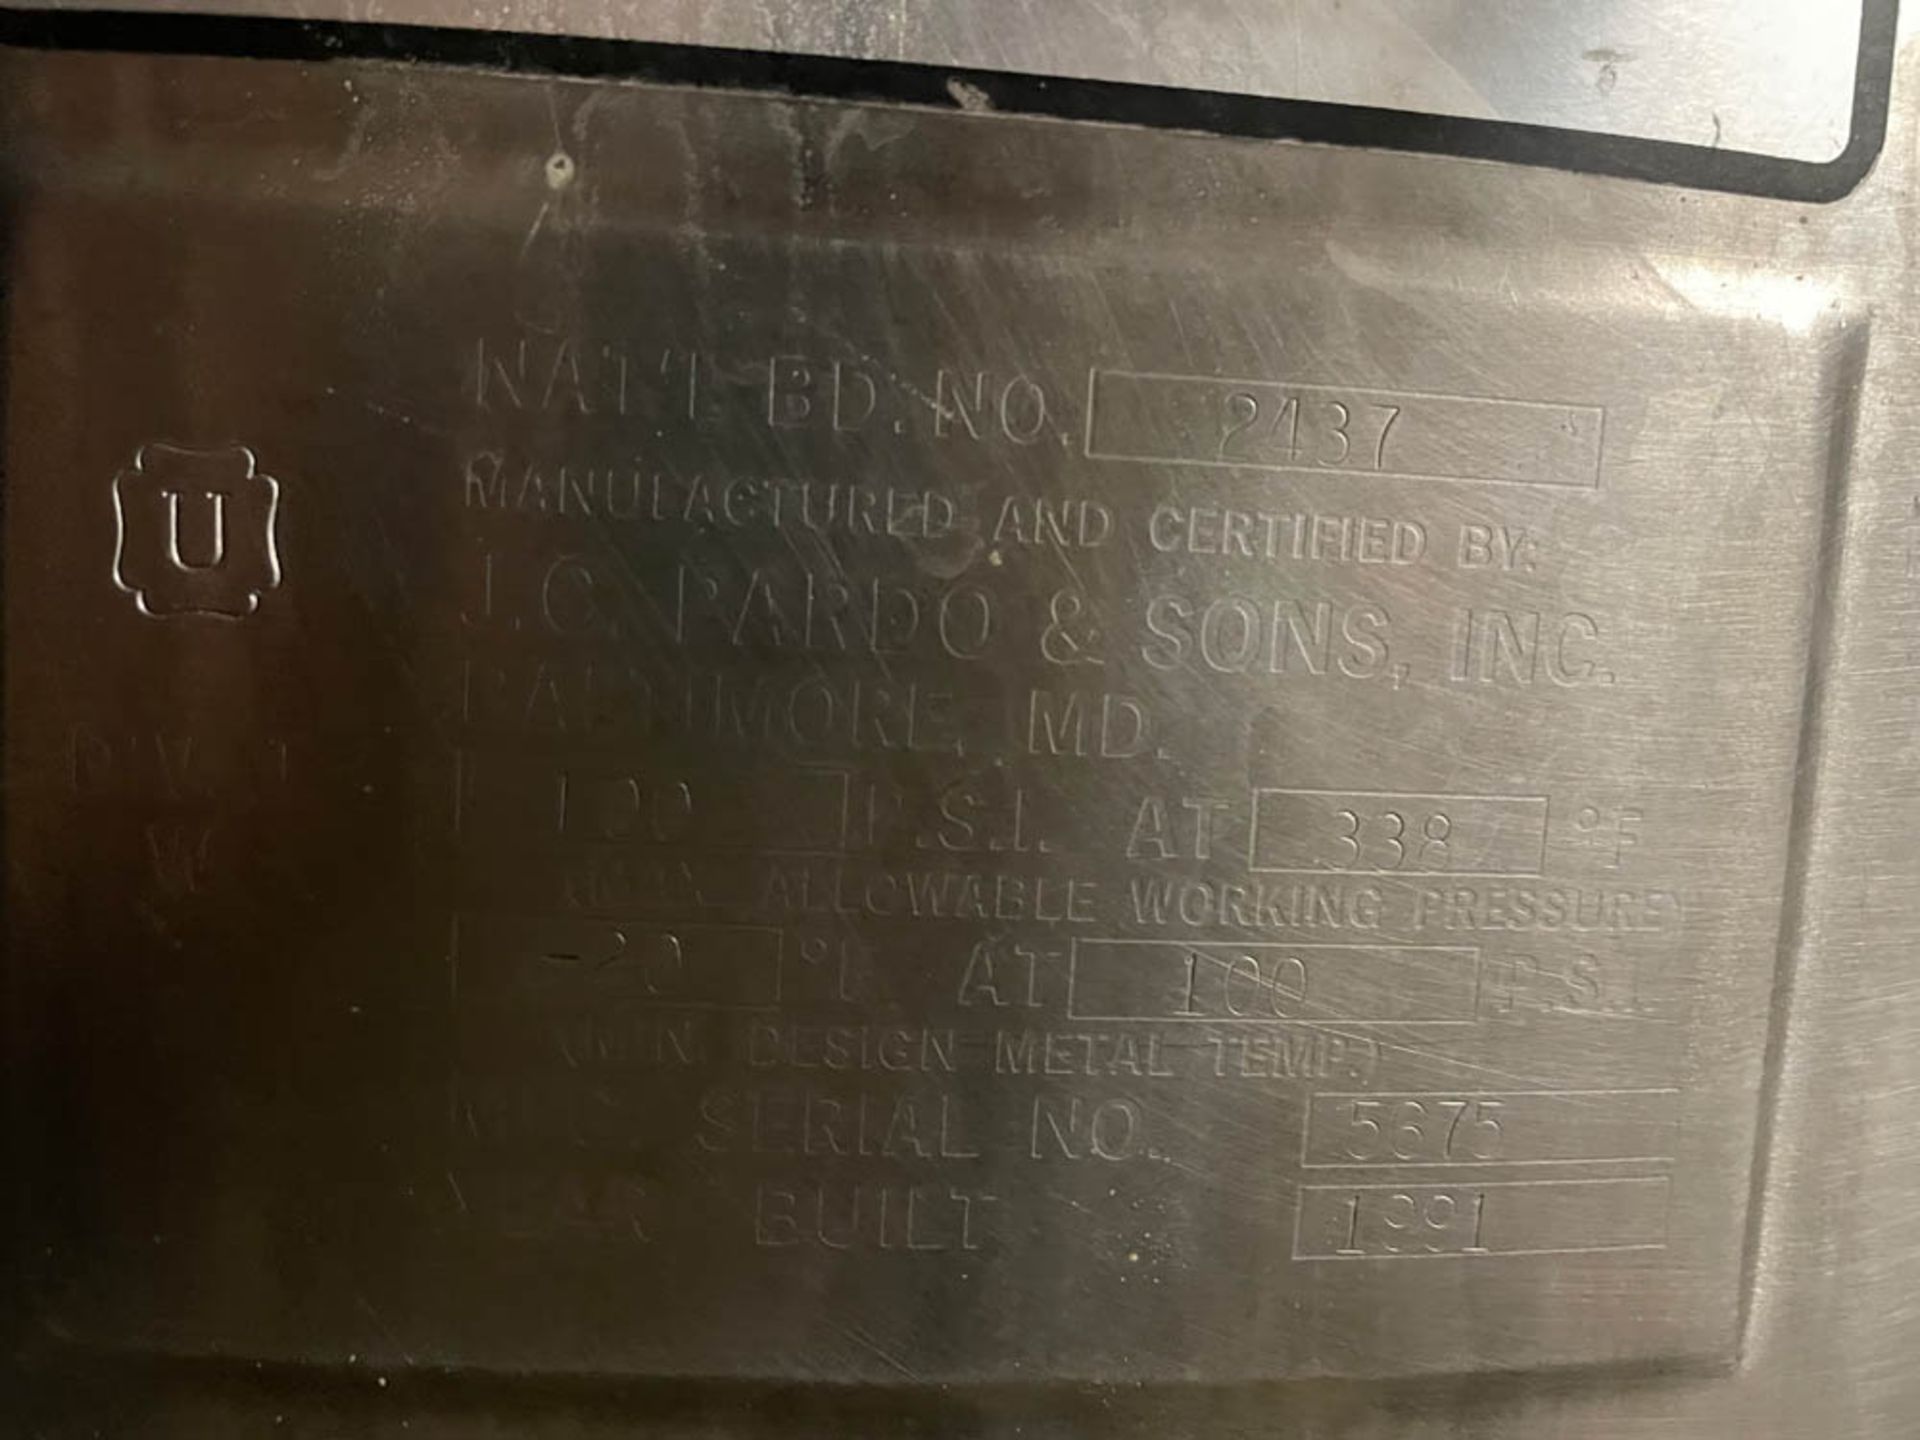 JC Pardo & Sons, Inc. 100 Gallon Jacketed Kettle - Image 6 of 13